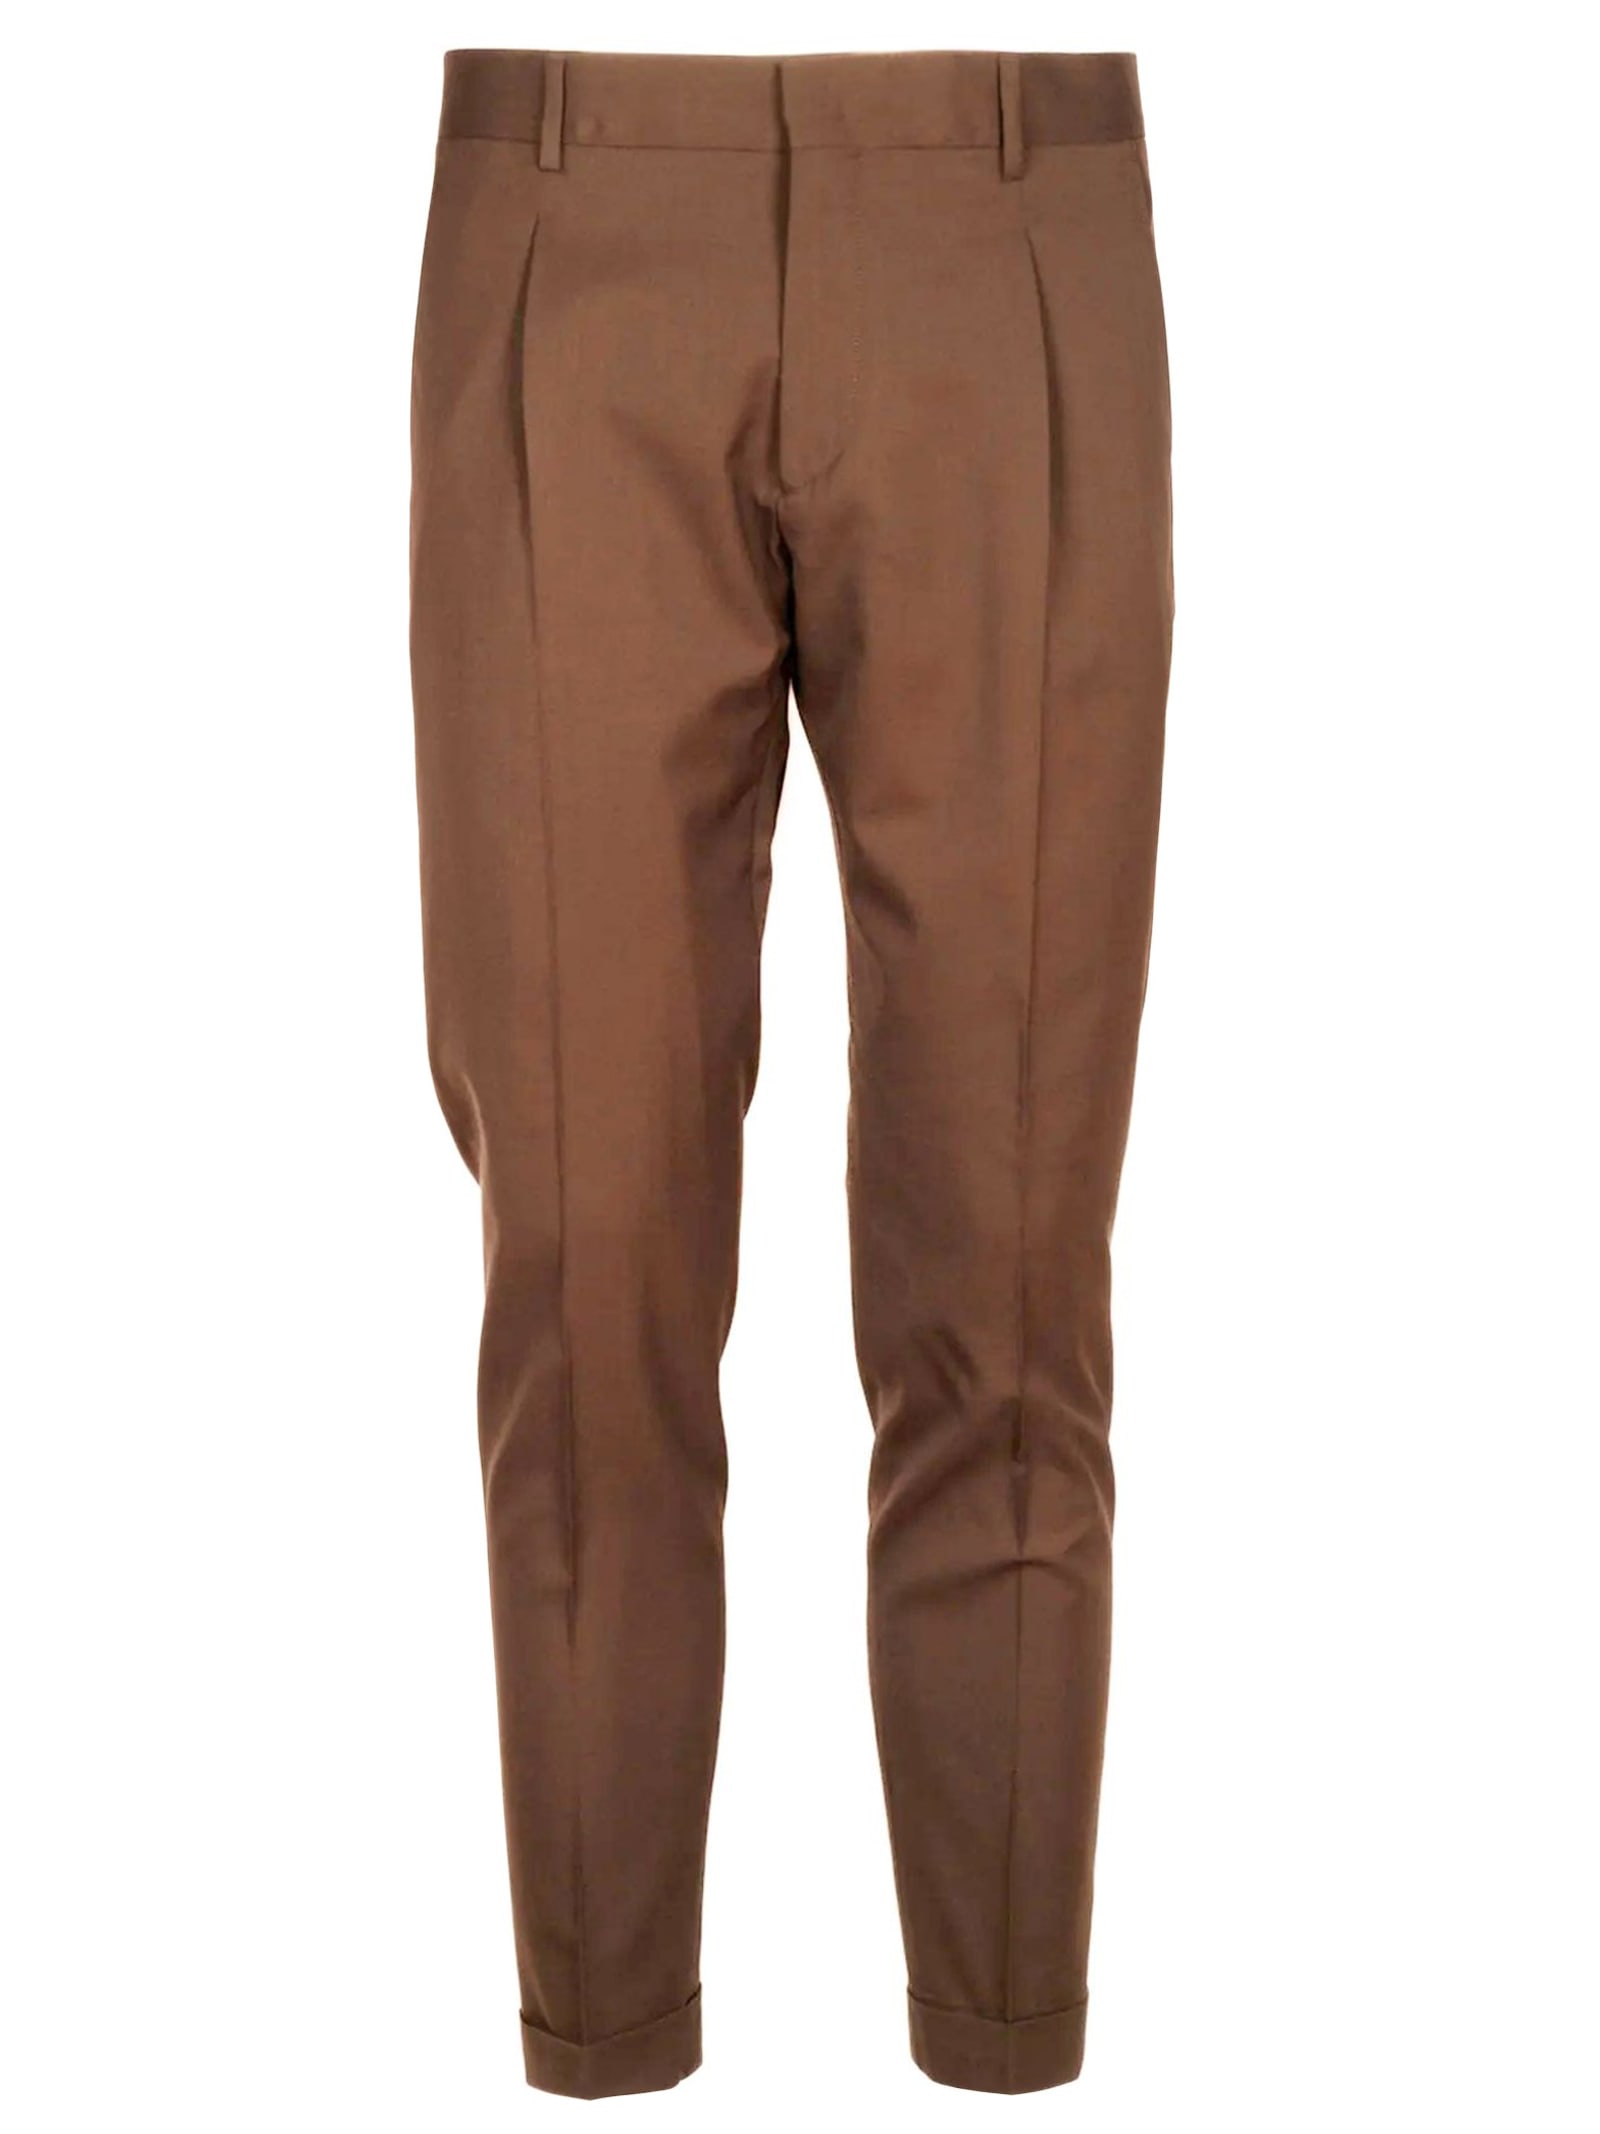 BE ABLE BROWN TAILORED PANTS